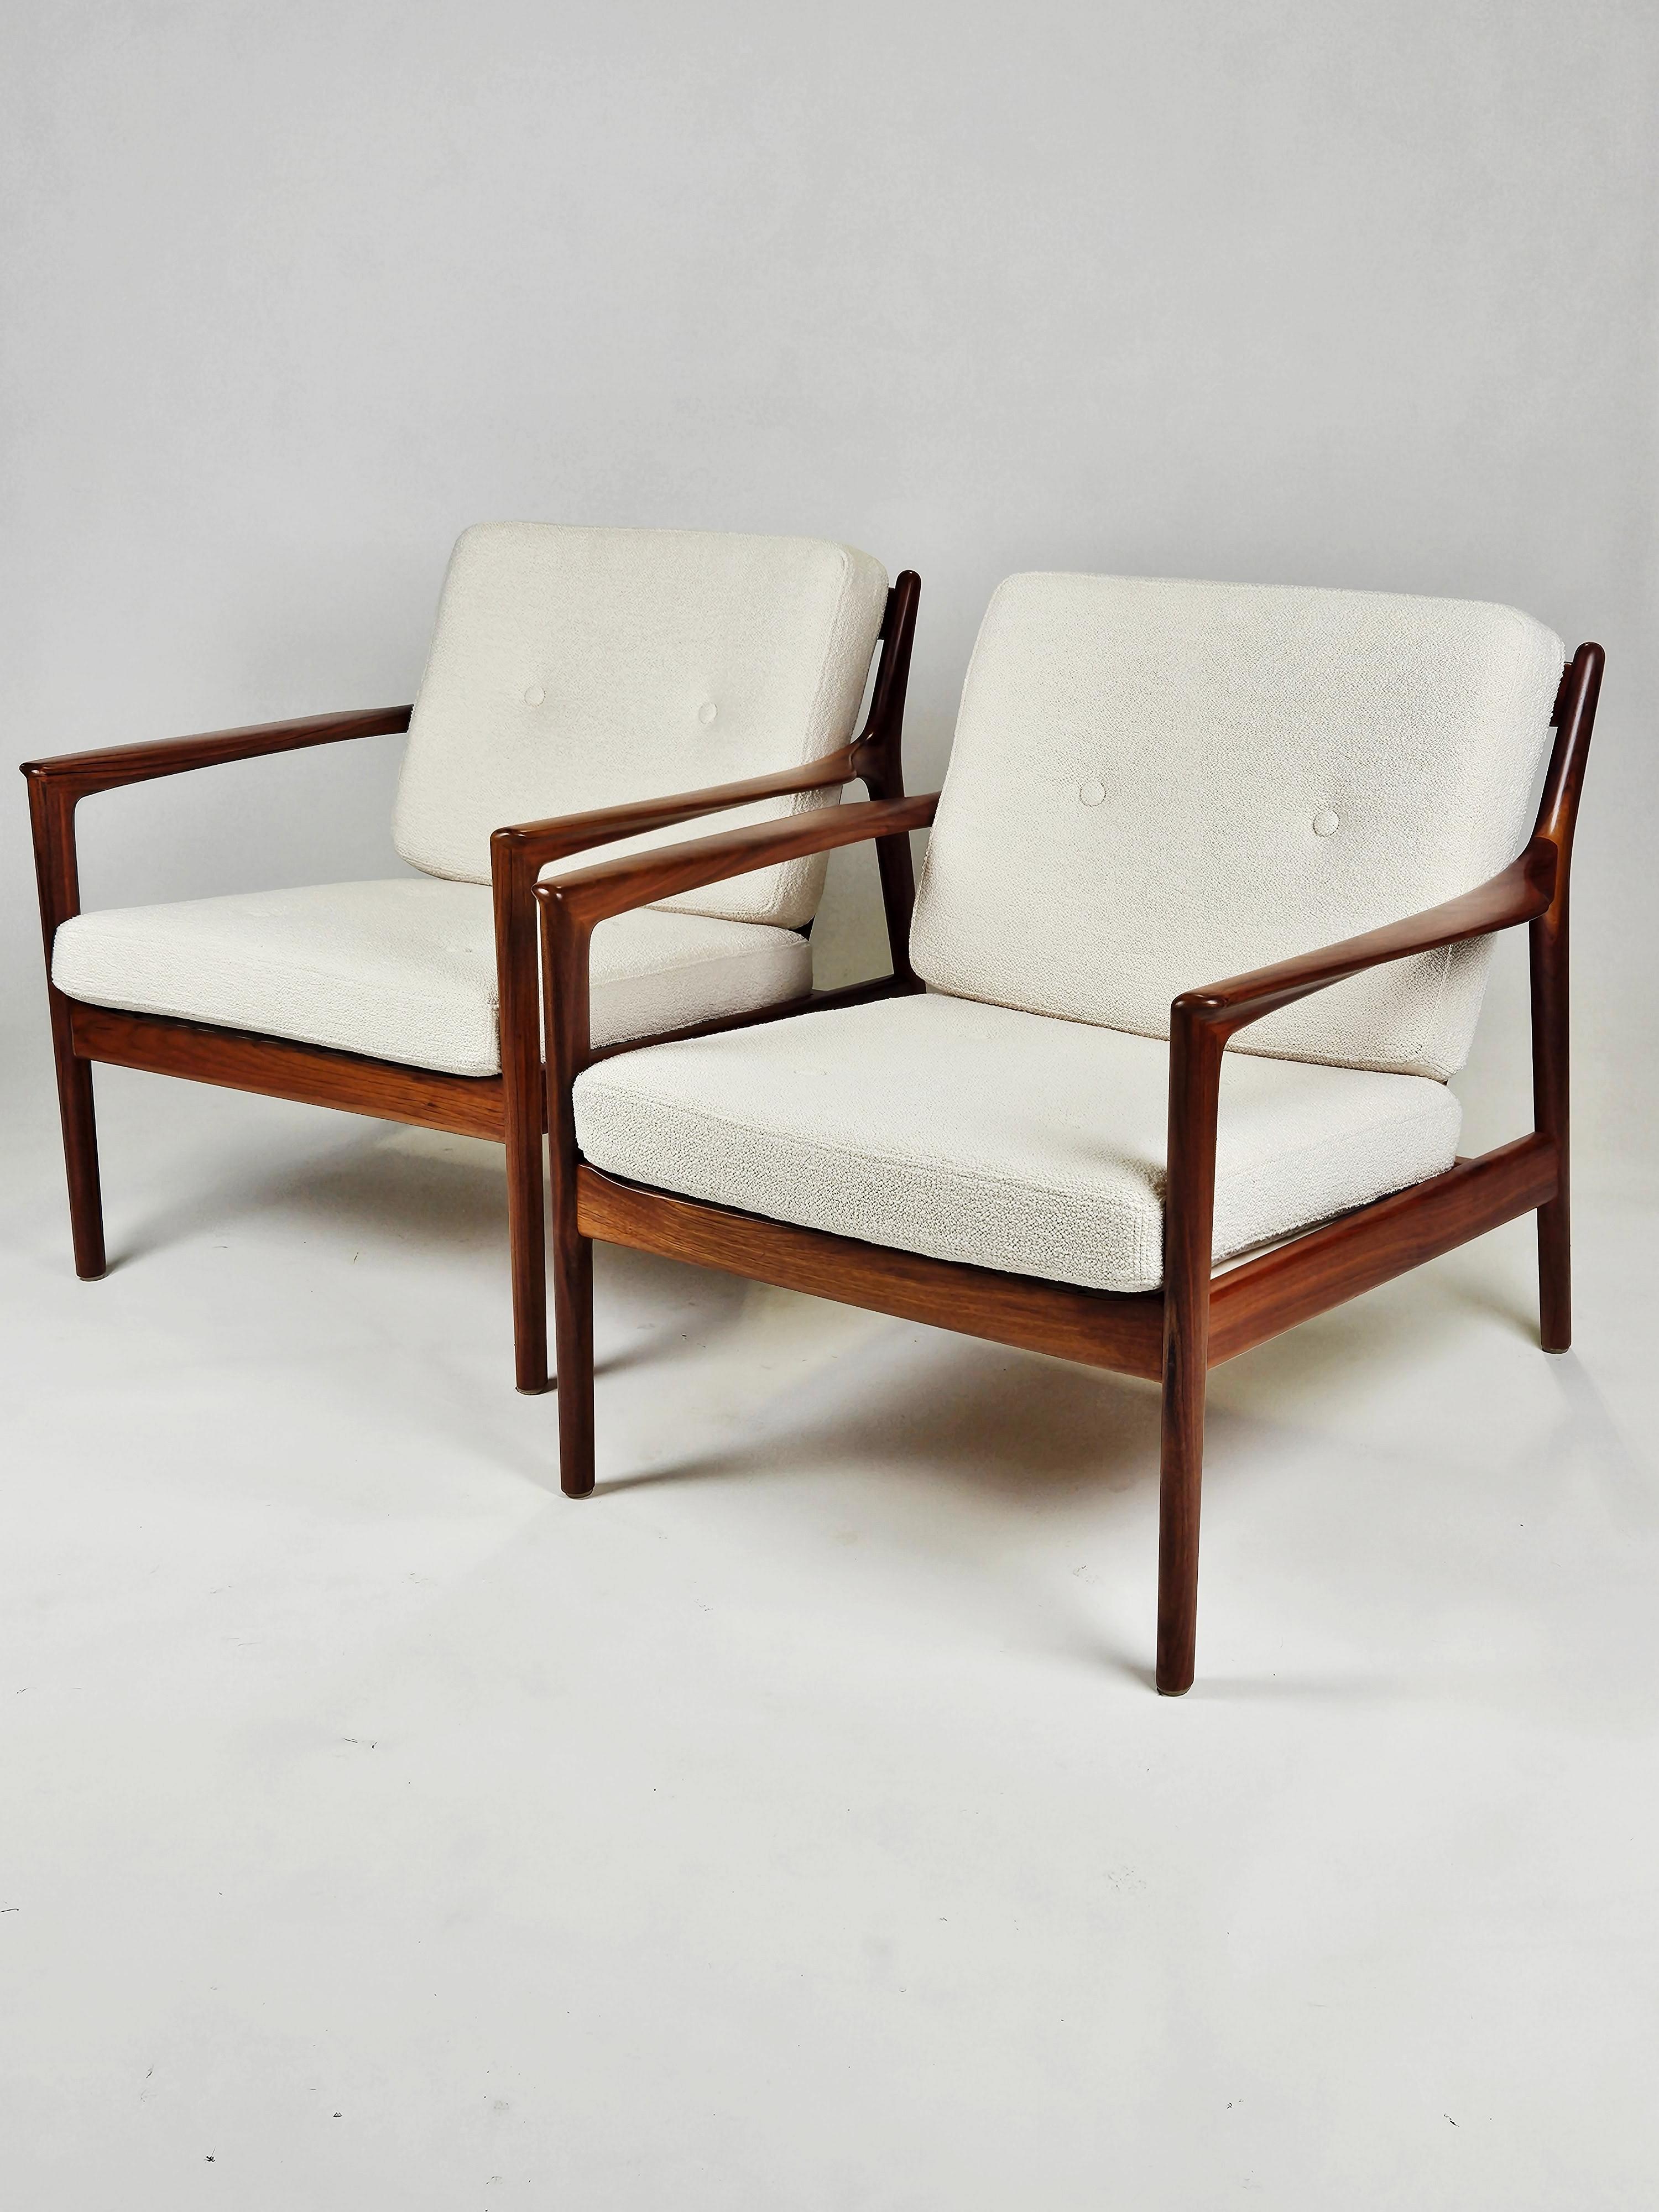 Folke Ohlssons classic lounge chair 'USA 75', produced by DUX, Sweden, during the 1960s.

This pair is in excellent condition with a exceptional walnut frame. Upholstered in high quality bouclé fabric. 
